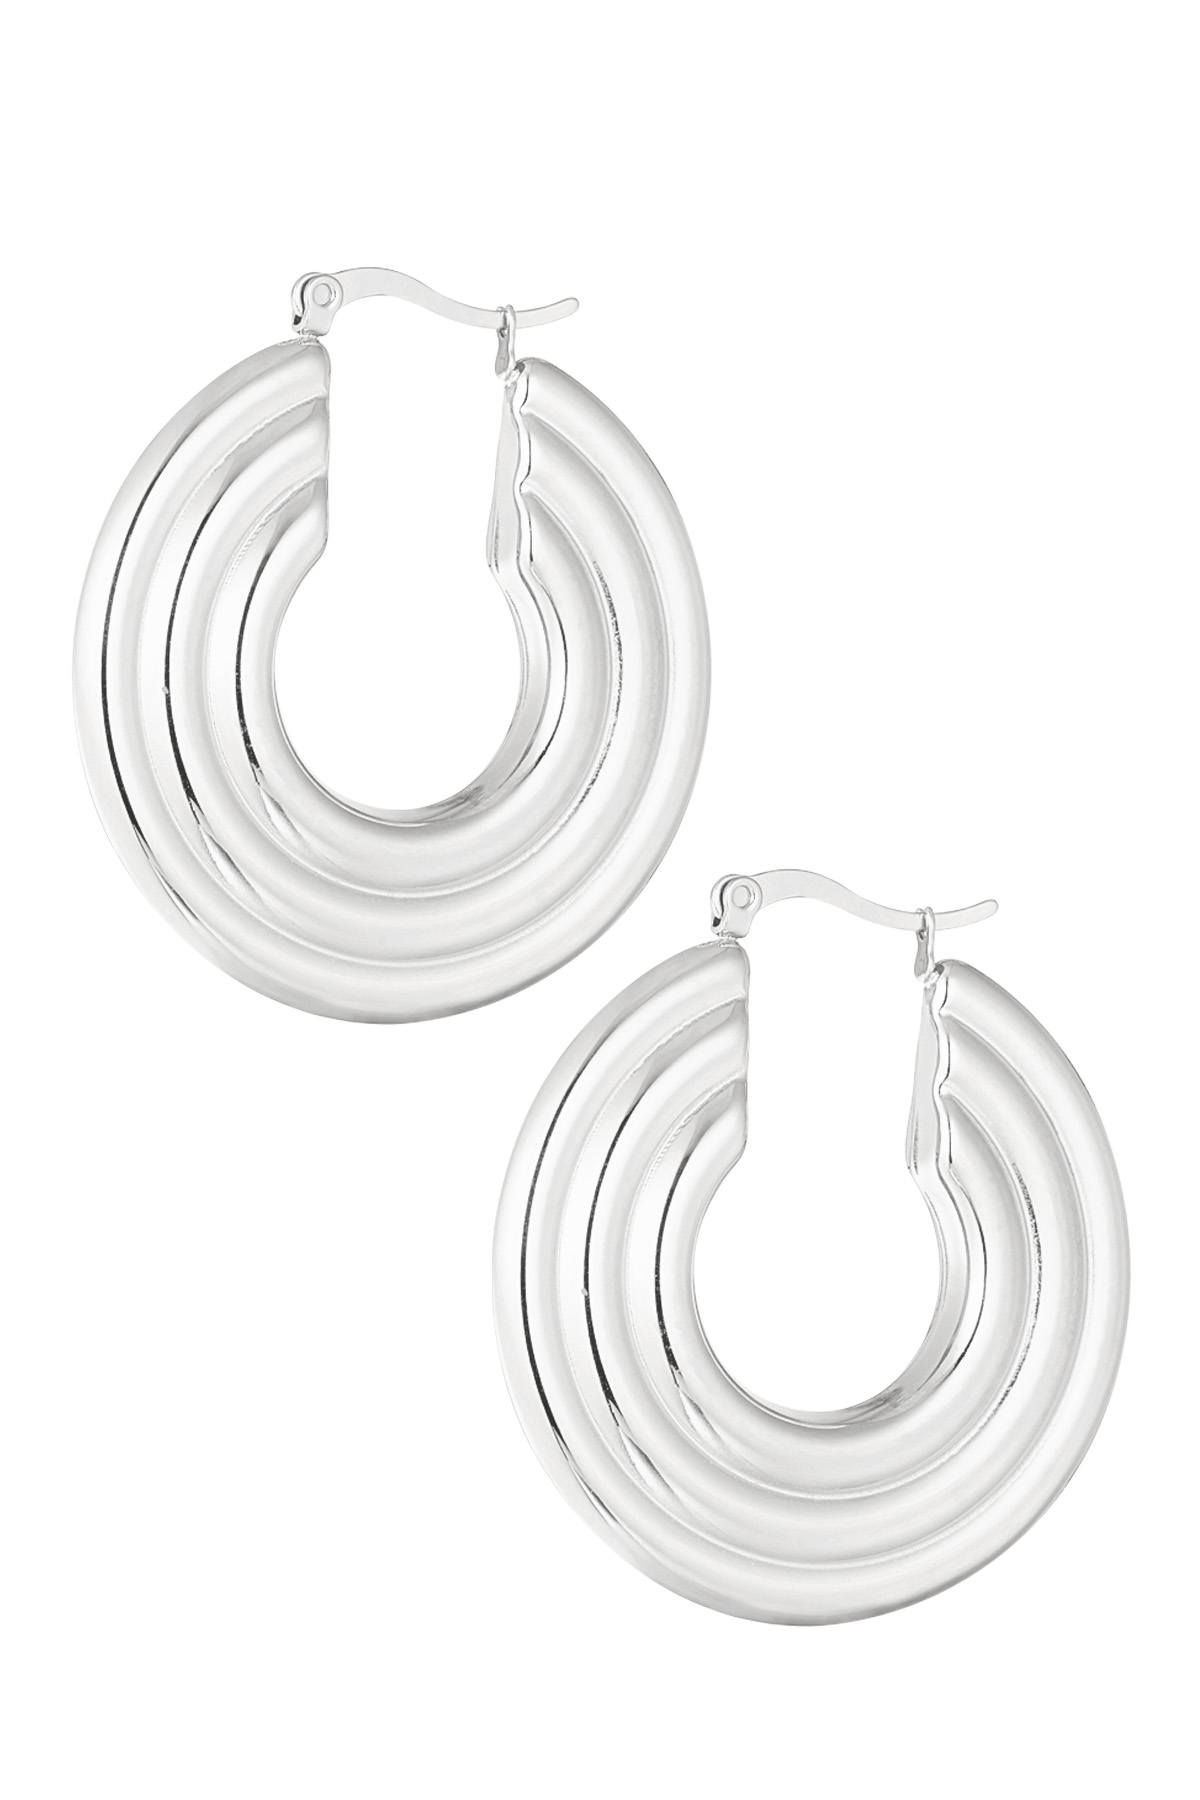 Round earrings with pattern - silver h5 